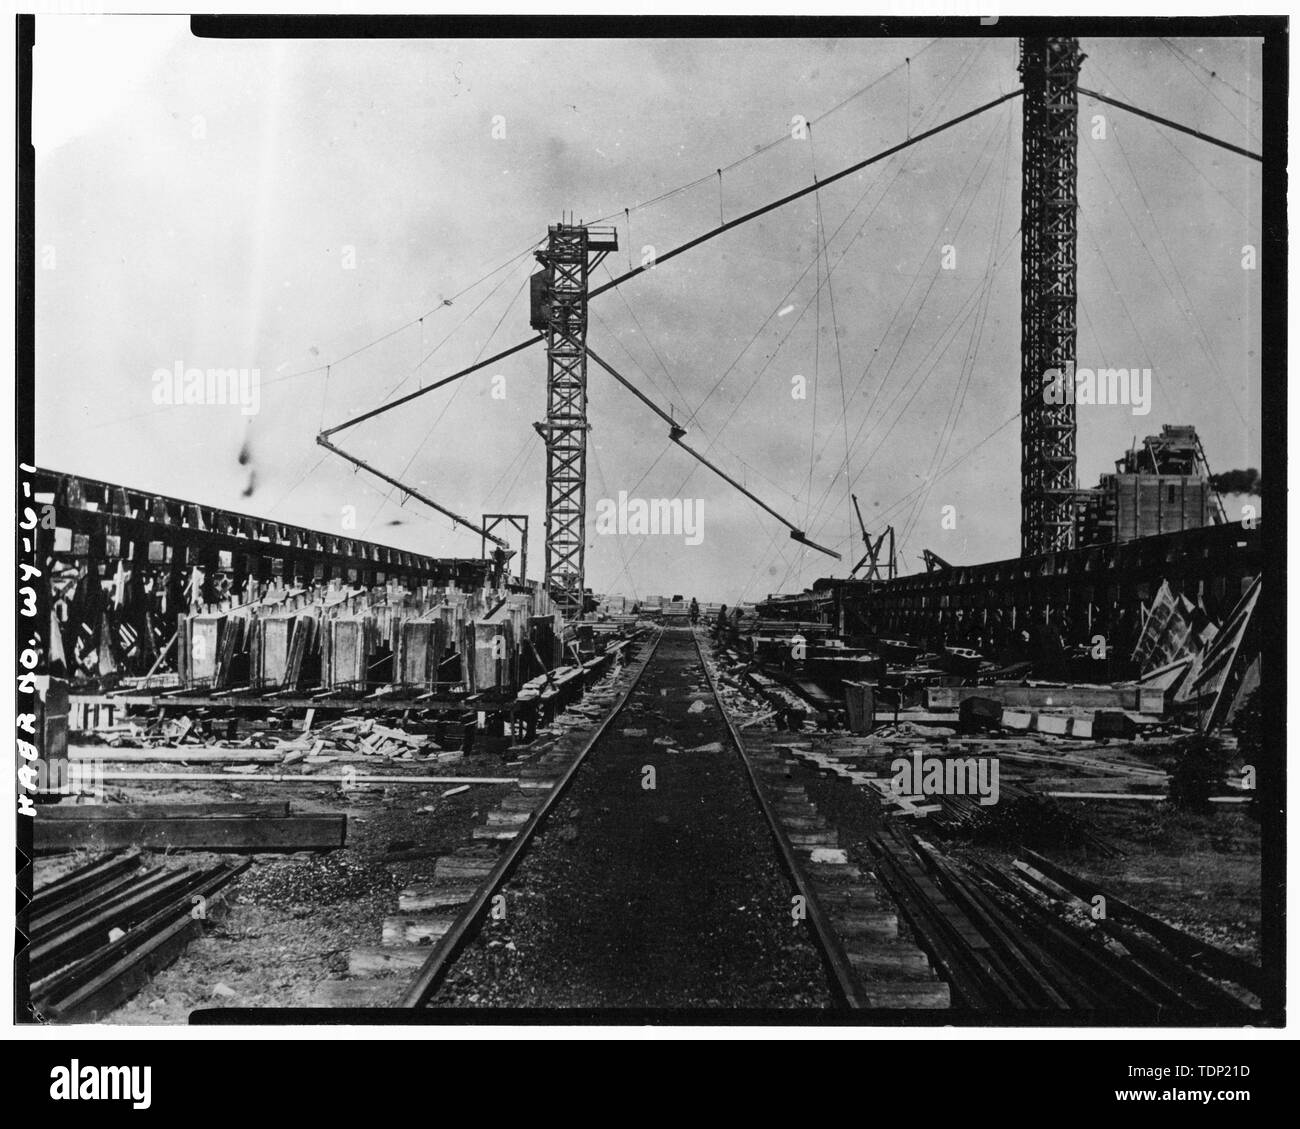 Photocopy of historic photograph of construction plant in operation, ca. 1917-19. From the Joseph E. Stimson Collection, Wyoming State Archives Museum and Historical Department. VIEW BETWEEN TRESTLES 4 AND 5, LOOKING SOUTH - Rock River Union Pacific Snowshed Plant, .6 Mile North of Rock River, Rock River, Albany County, WY; Union Pacific Transcontinental Railroad; Wyoming State Highway Department Stock Photo